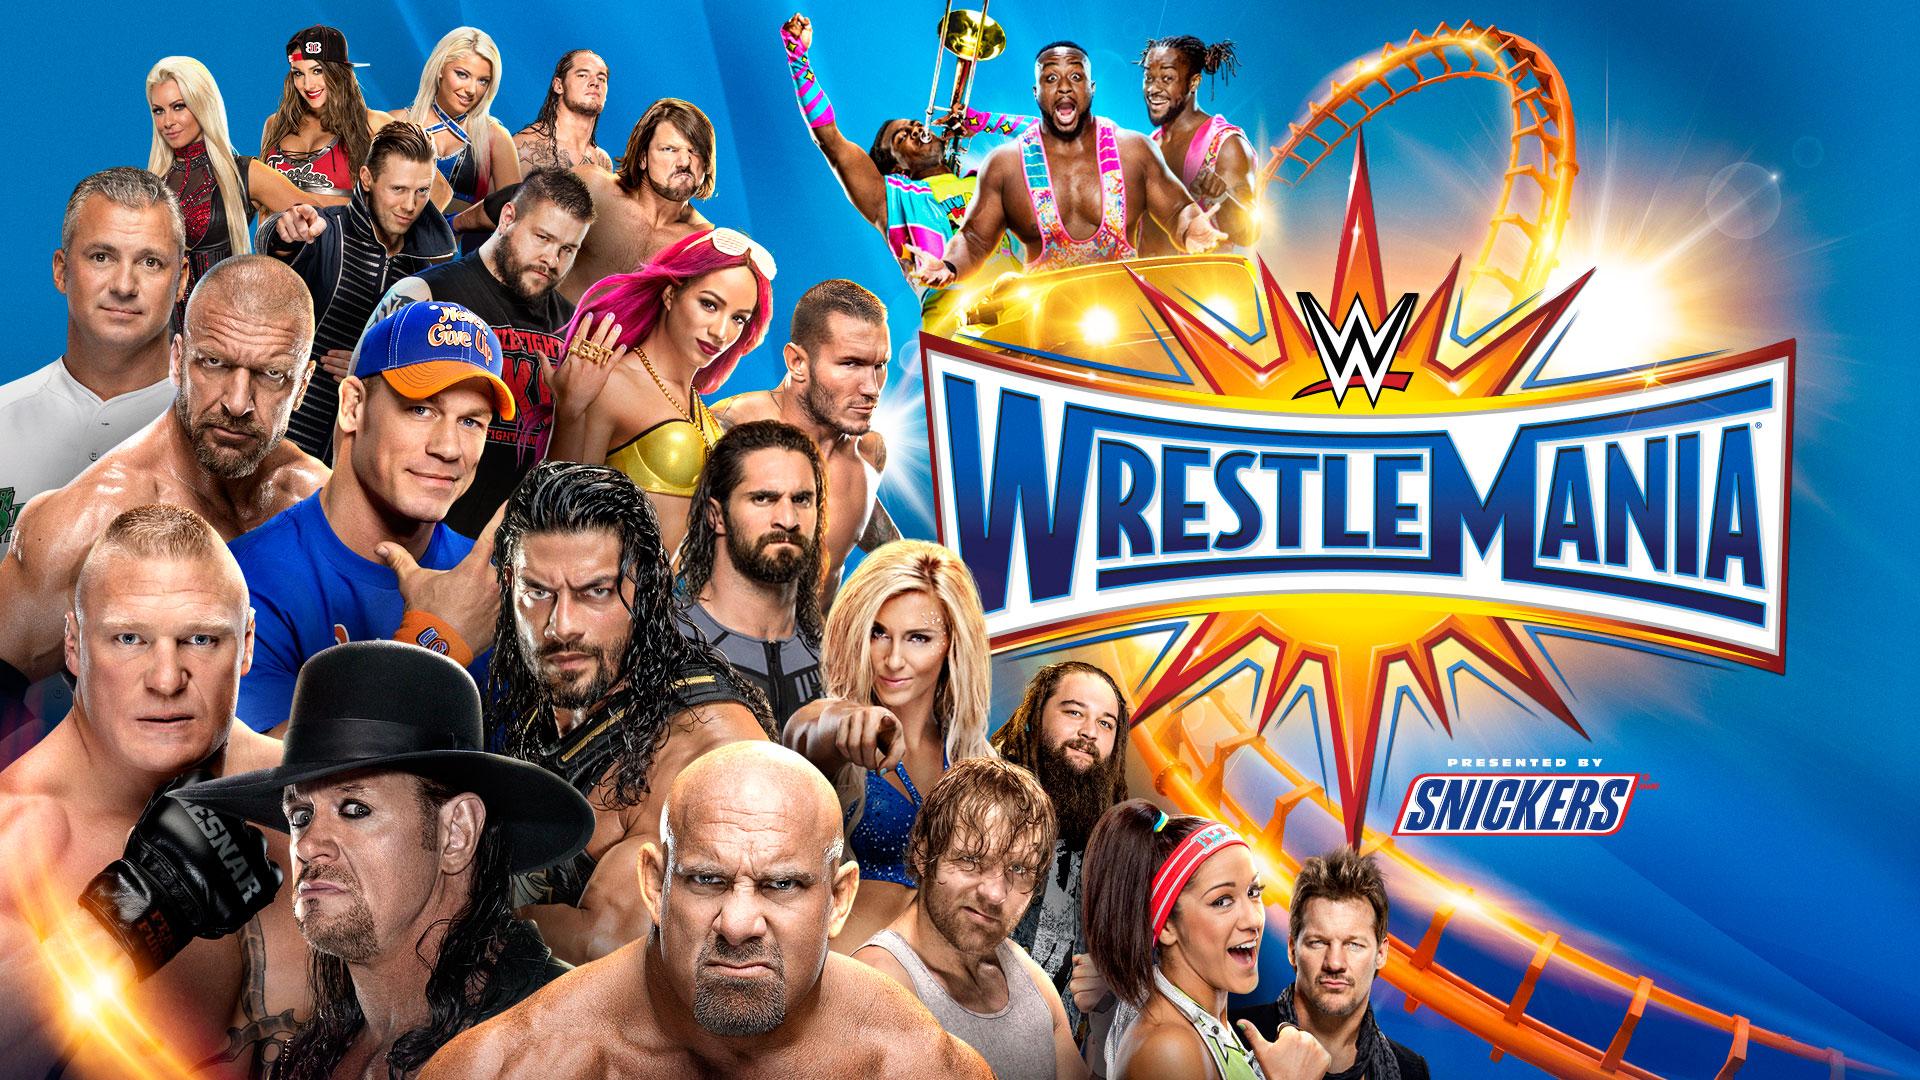 How Much Money Does It Cost to Go to WrestleMania? | Heavy.com